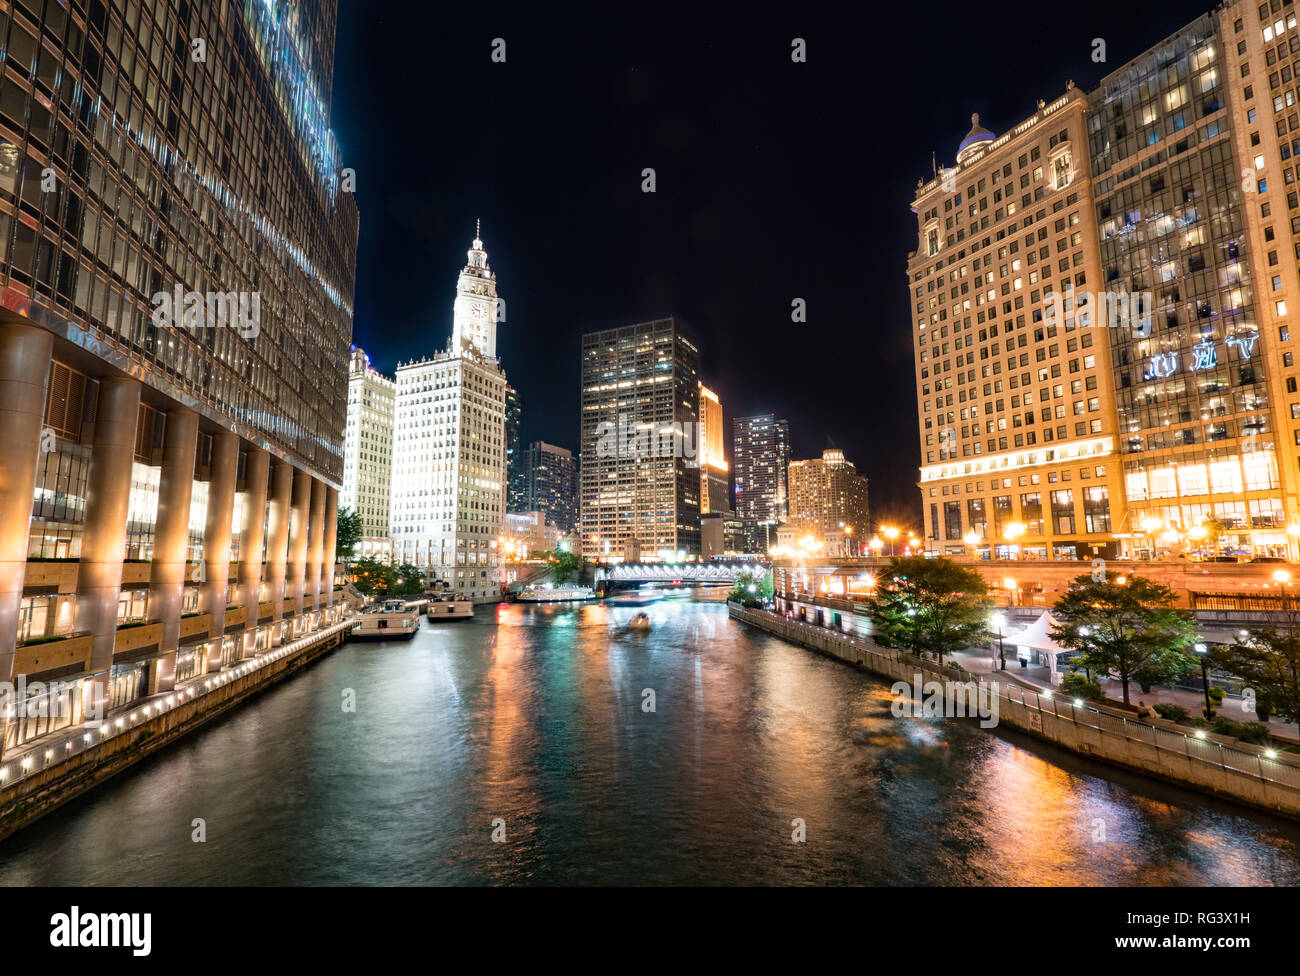 Downtown Chicago city skyline along the Chicago River at night Stock Photo